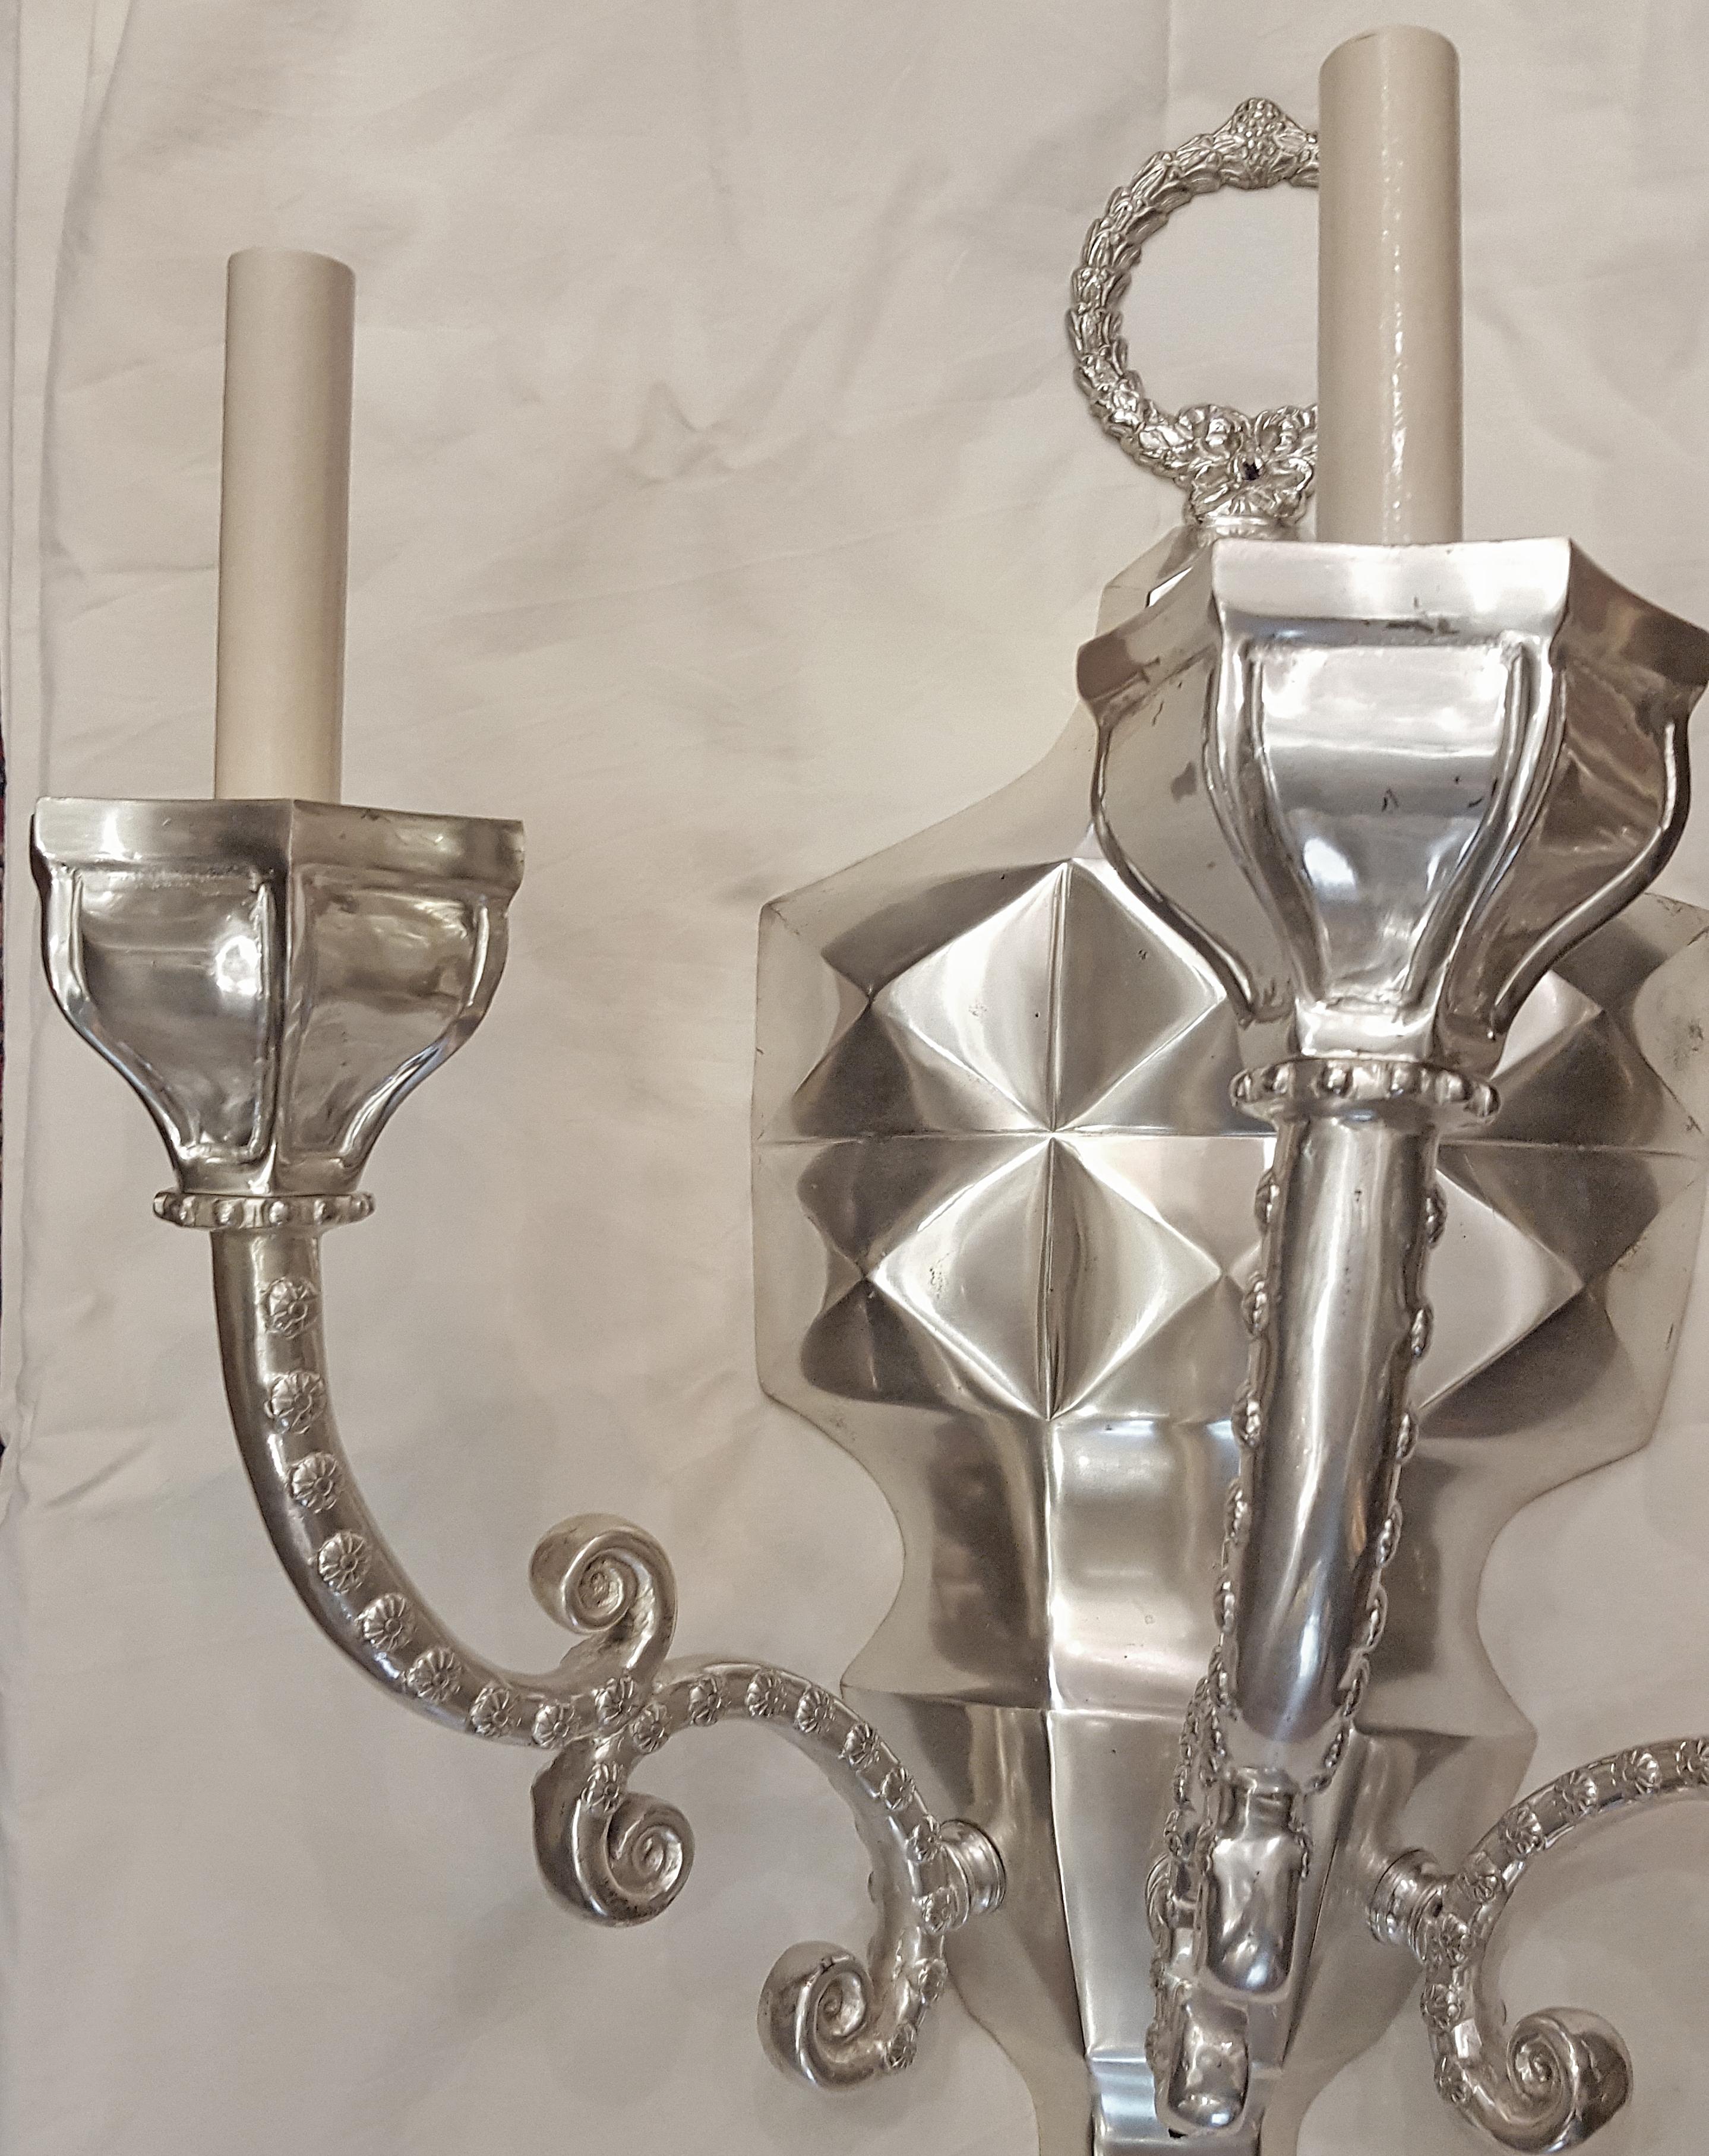 Set of four large neoclassic style, silver-plated, three-arm sconces with tassel motif. Priced and sold in pairs.

Measurements:
Height: 26